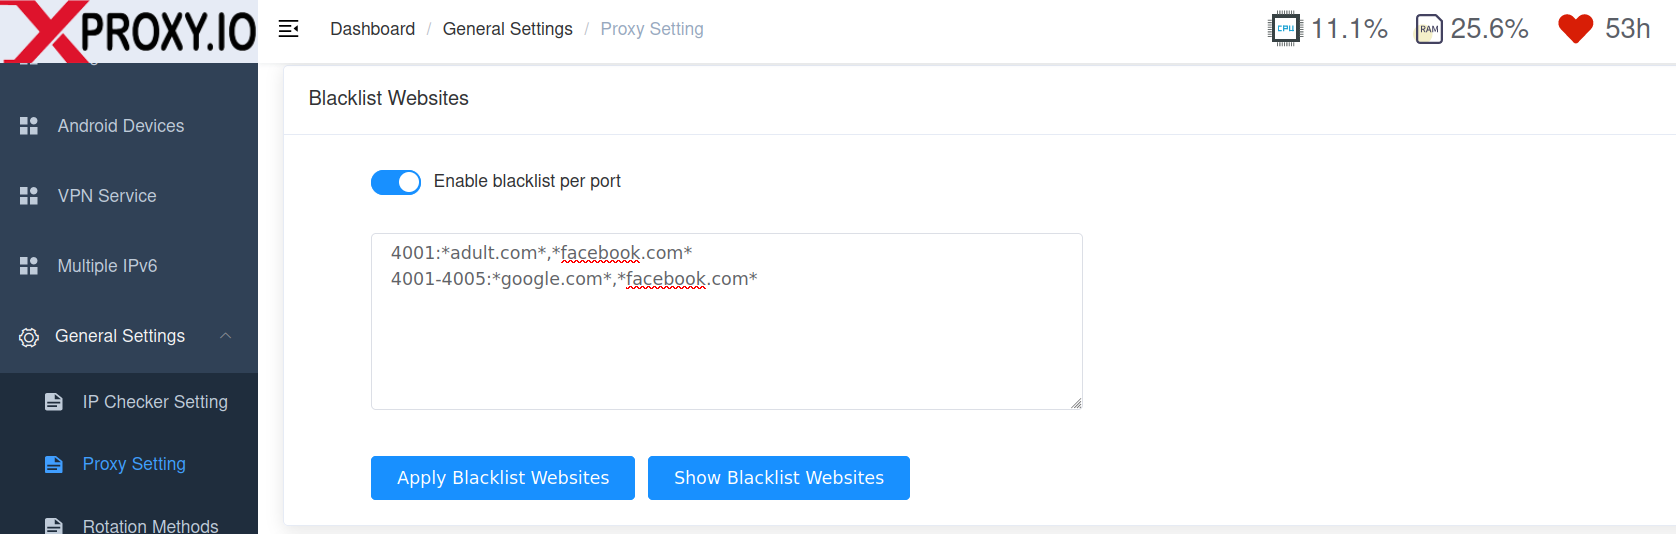 Setting for Blacklist Website Entries Per Proxy - Waiting for image loading